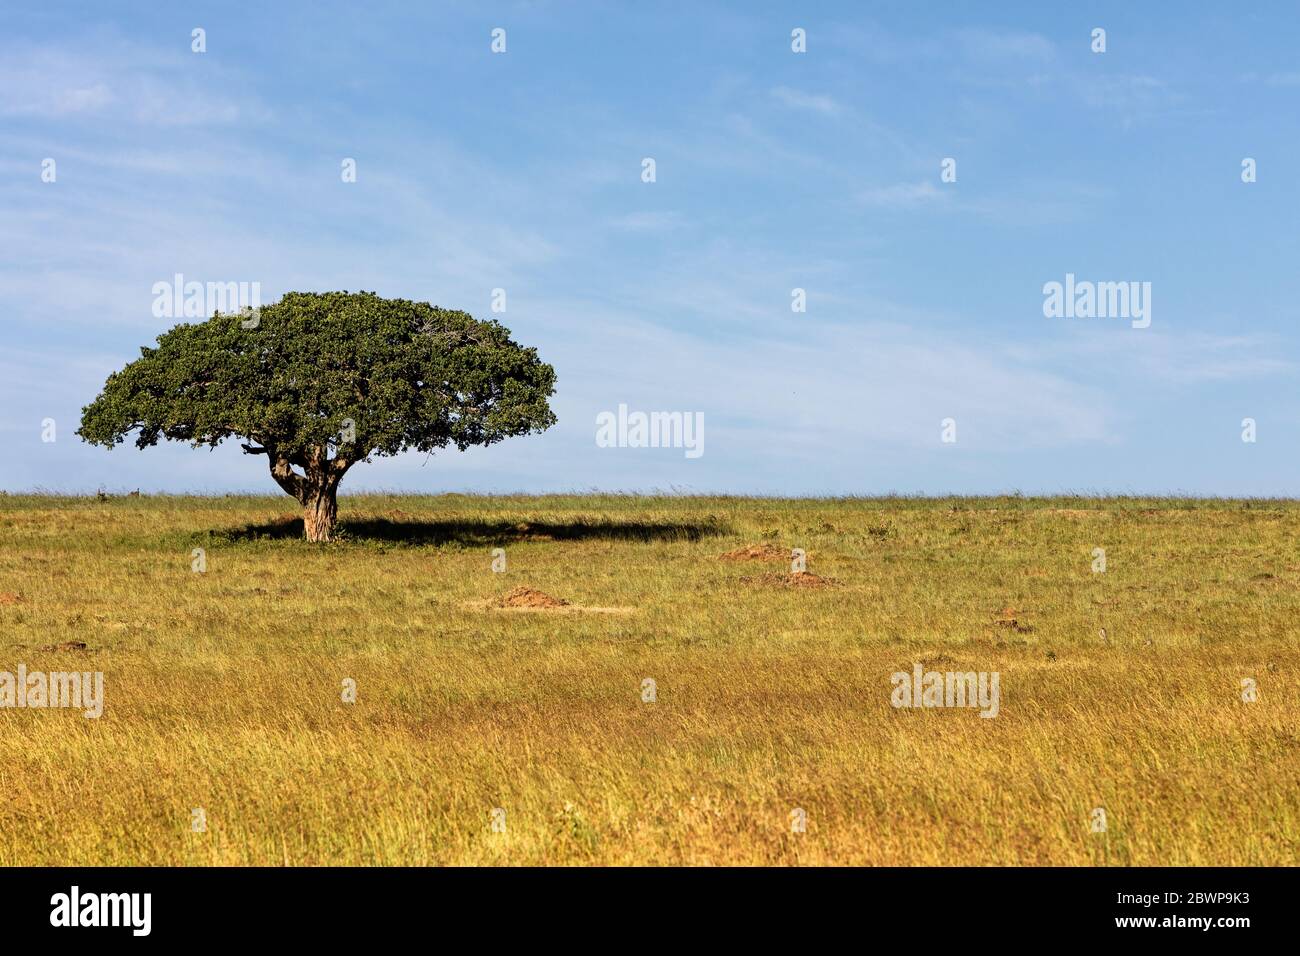 Single tree with wide umbrella and shade underneath in open field in Kenya, Africa Stock Photo